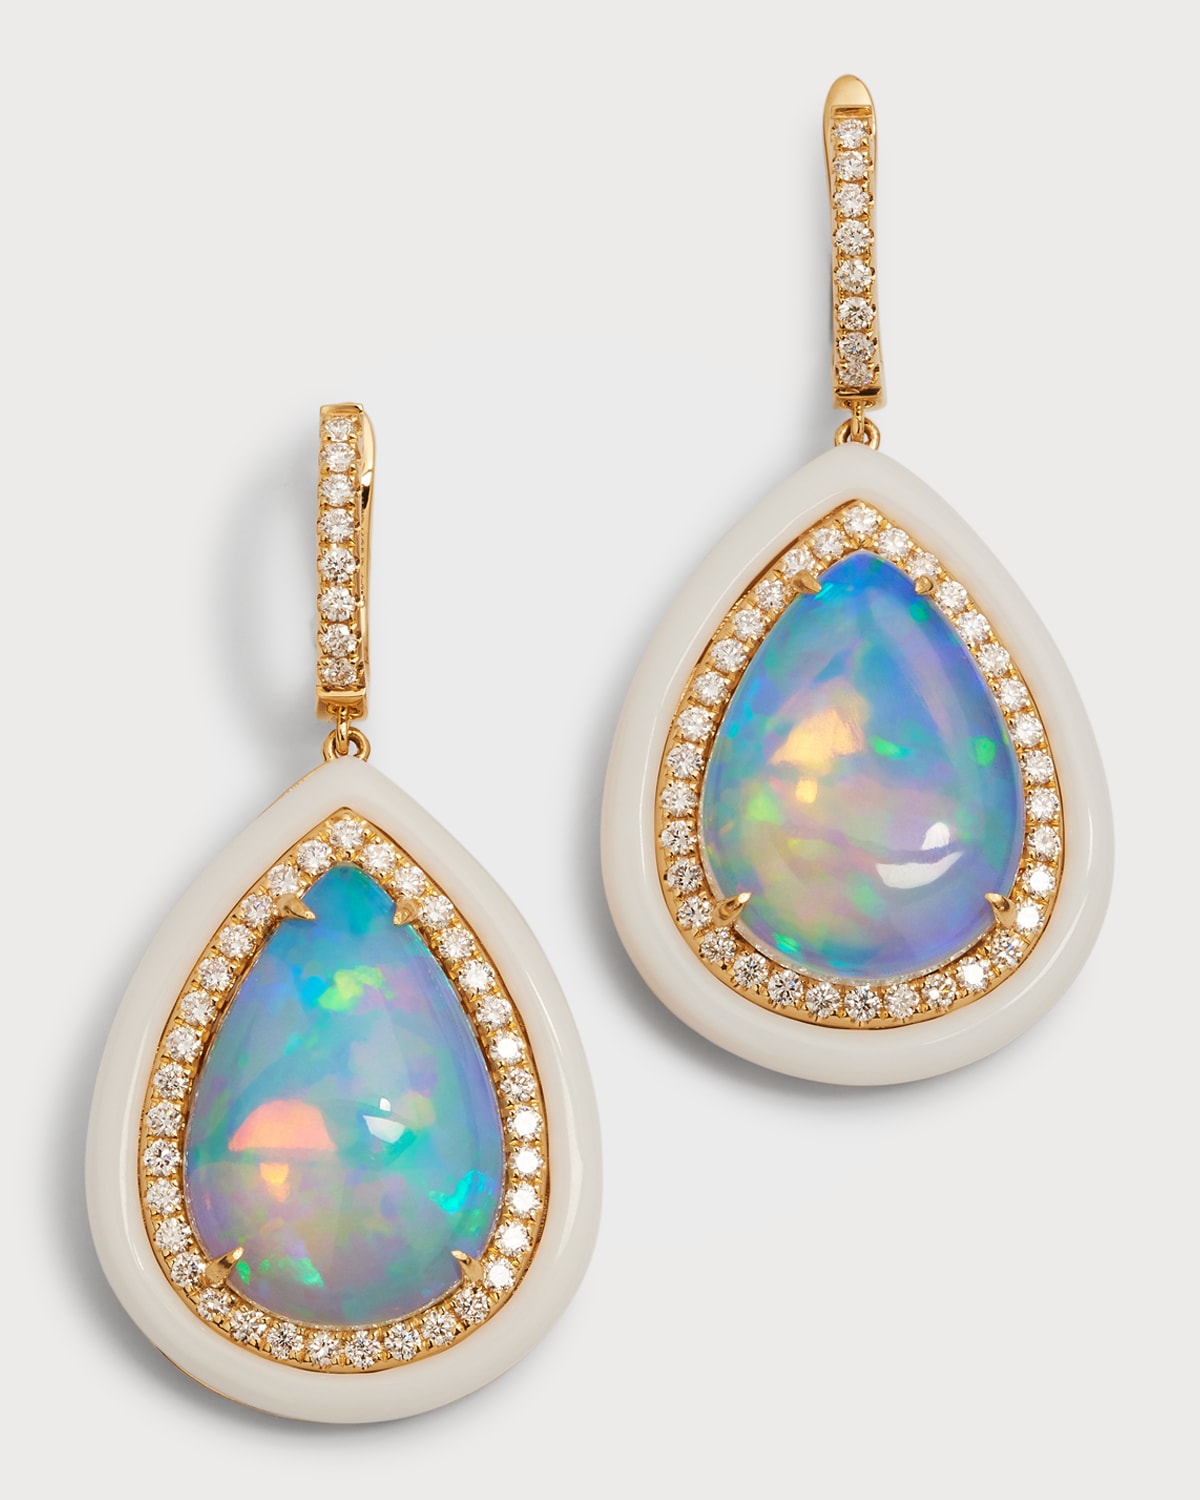 18K Yellow Gold Earrings with Pear-Shape Opal, Diamonds and White Frame, 12.01tcw